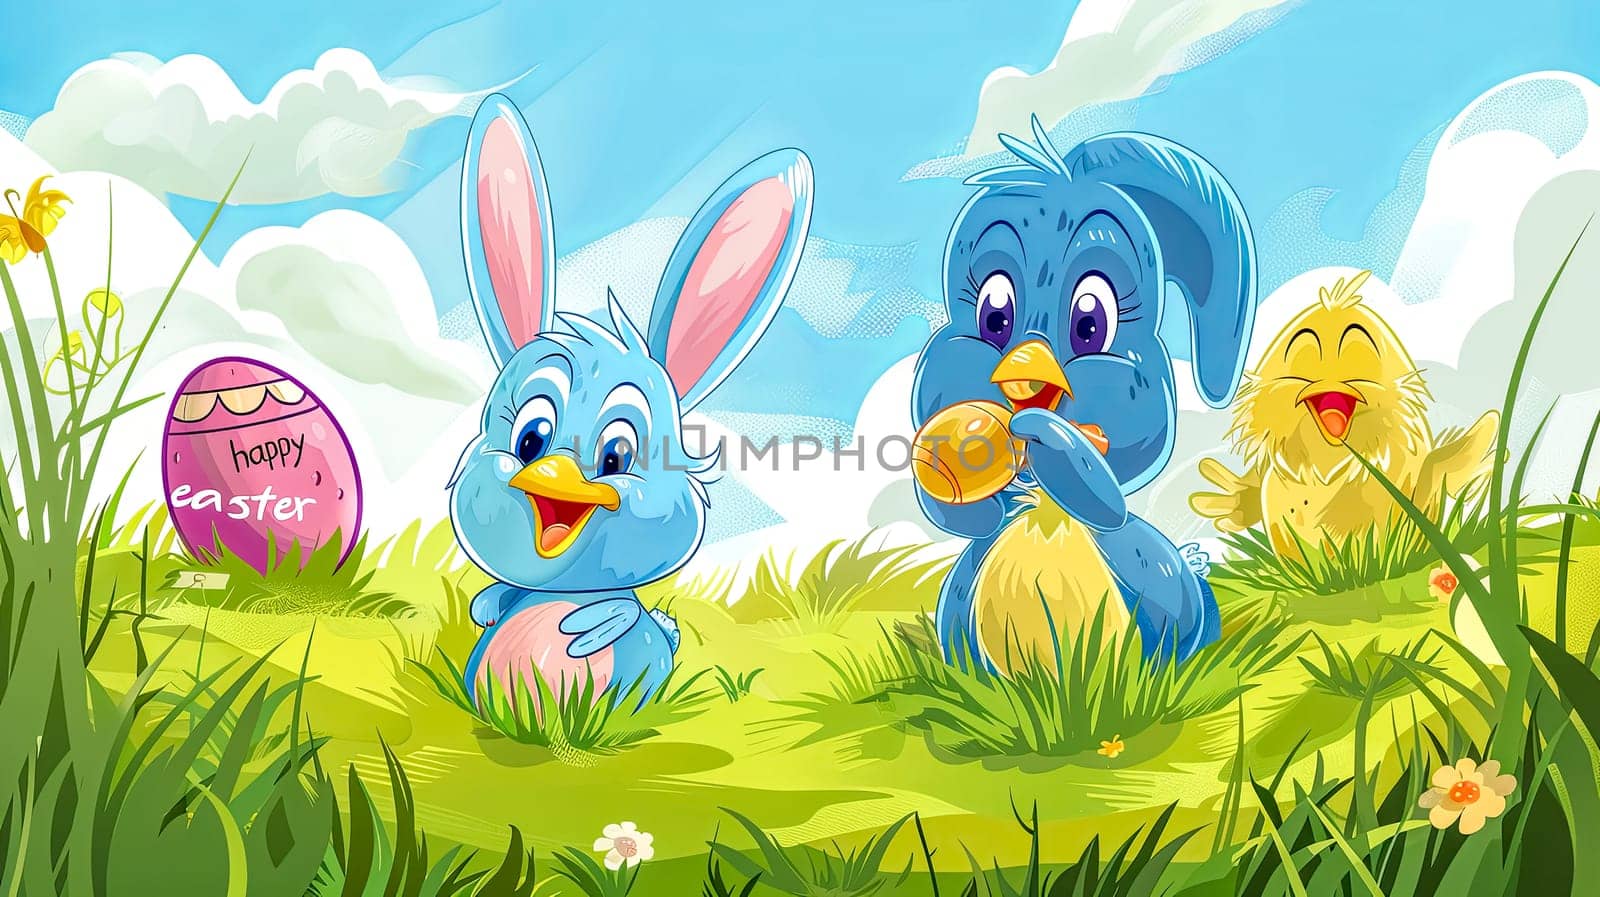 Colorful easter celebration with cartoon animals by Edophoto